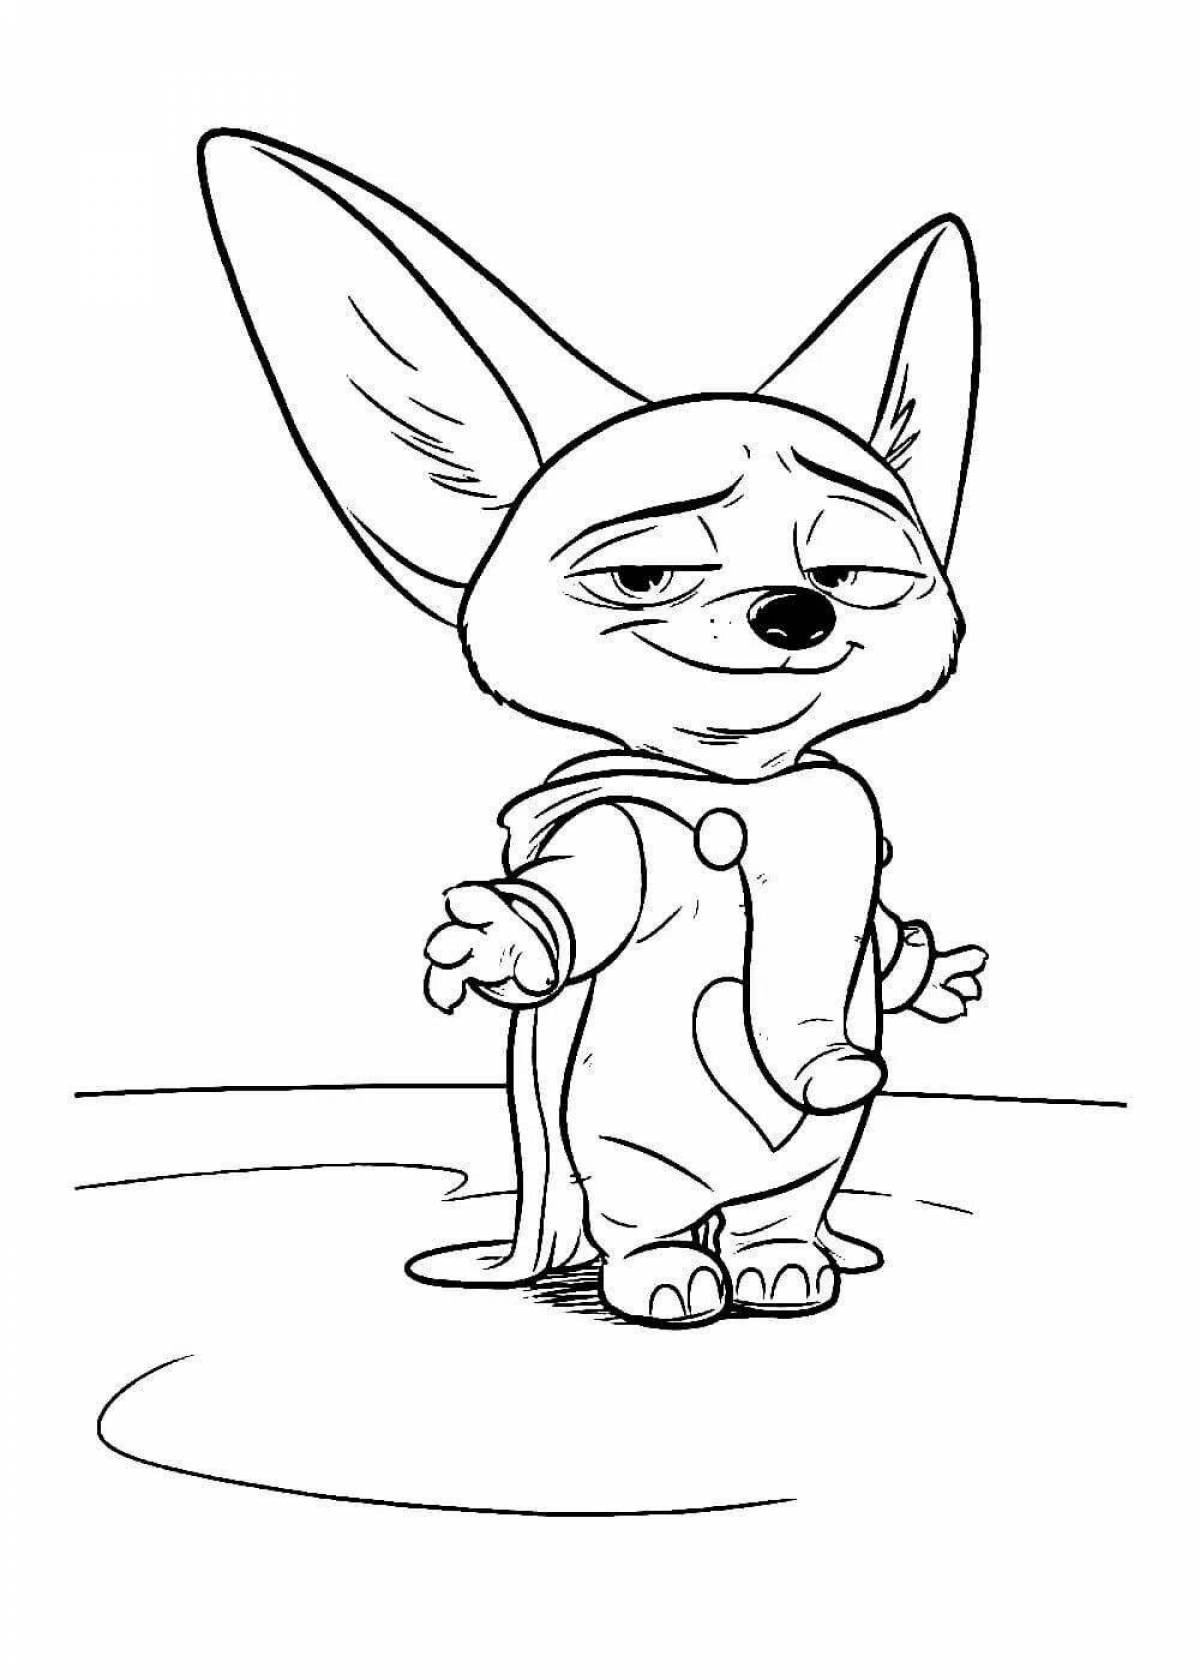 Zootopia bunny jumping coloring book